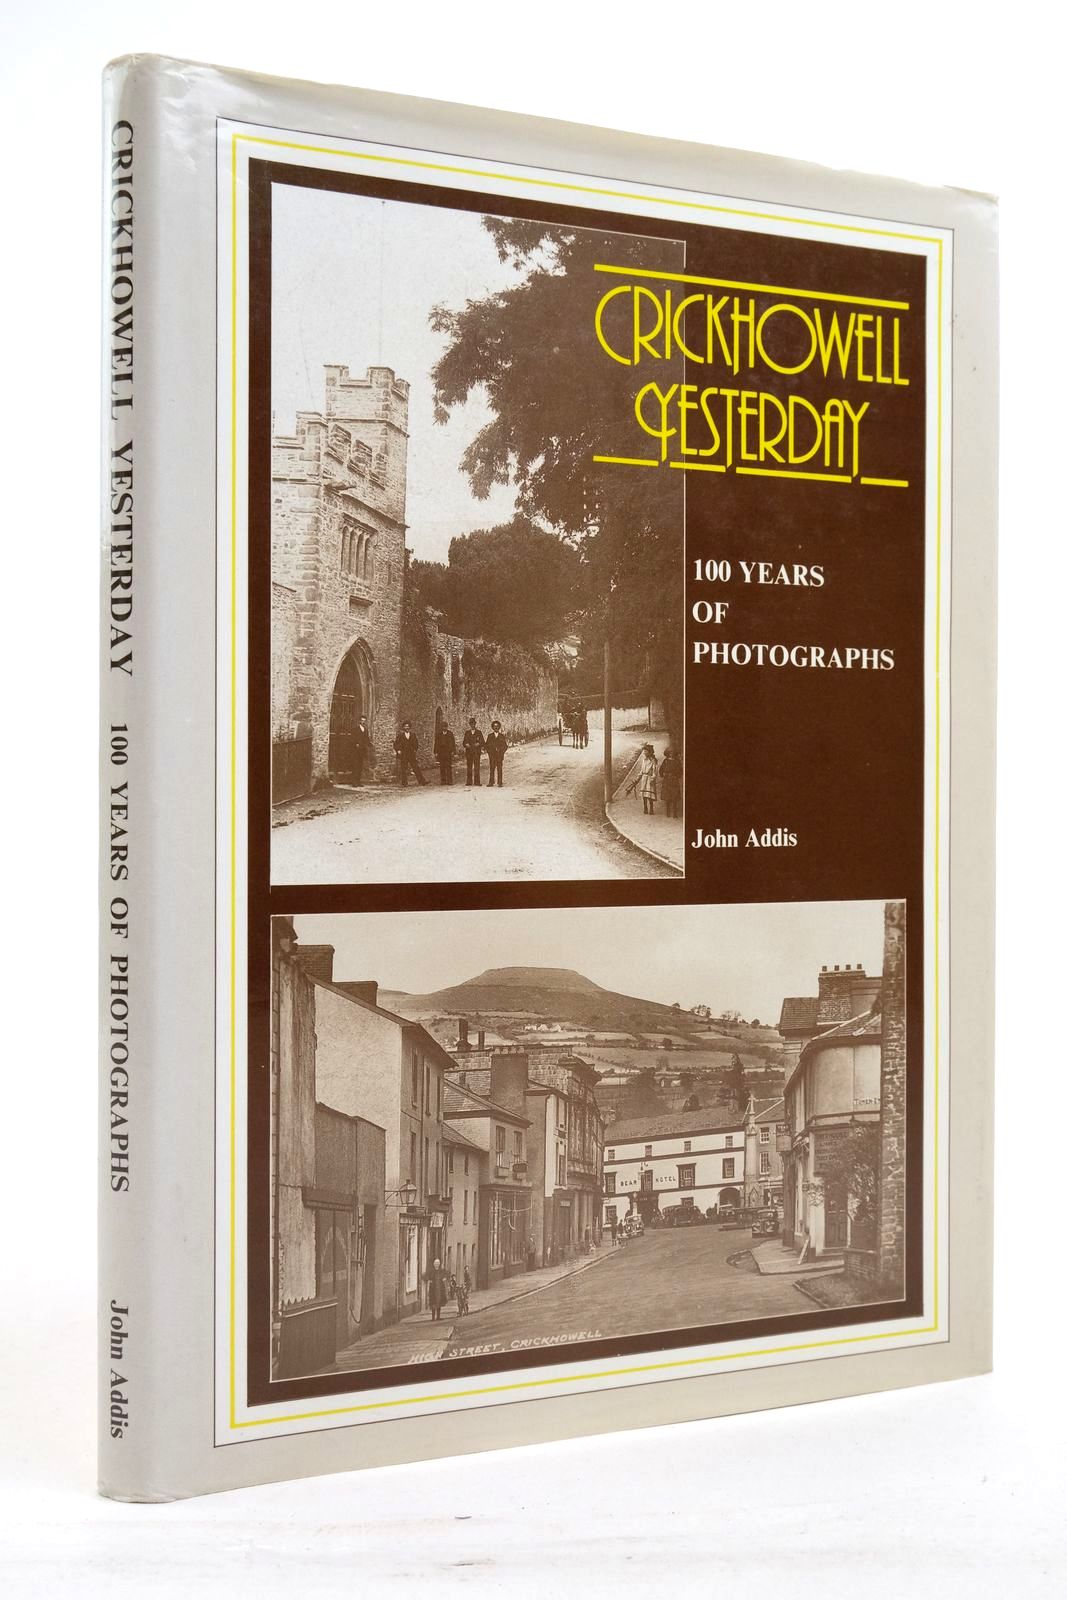 Photo of CRICKHOWELL YESTERDAY: 100 YEARS OF PHOTOGRAPHS- Stock Number: 2137959